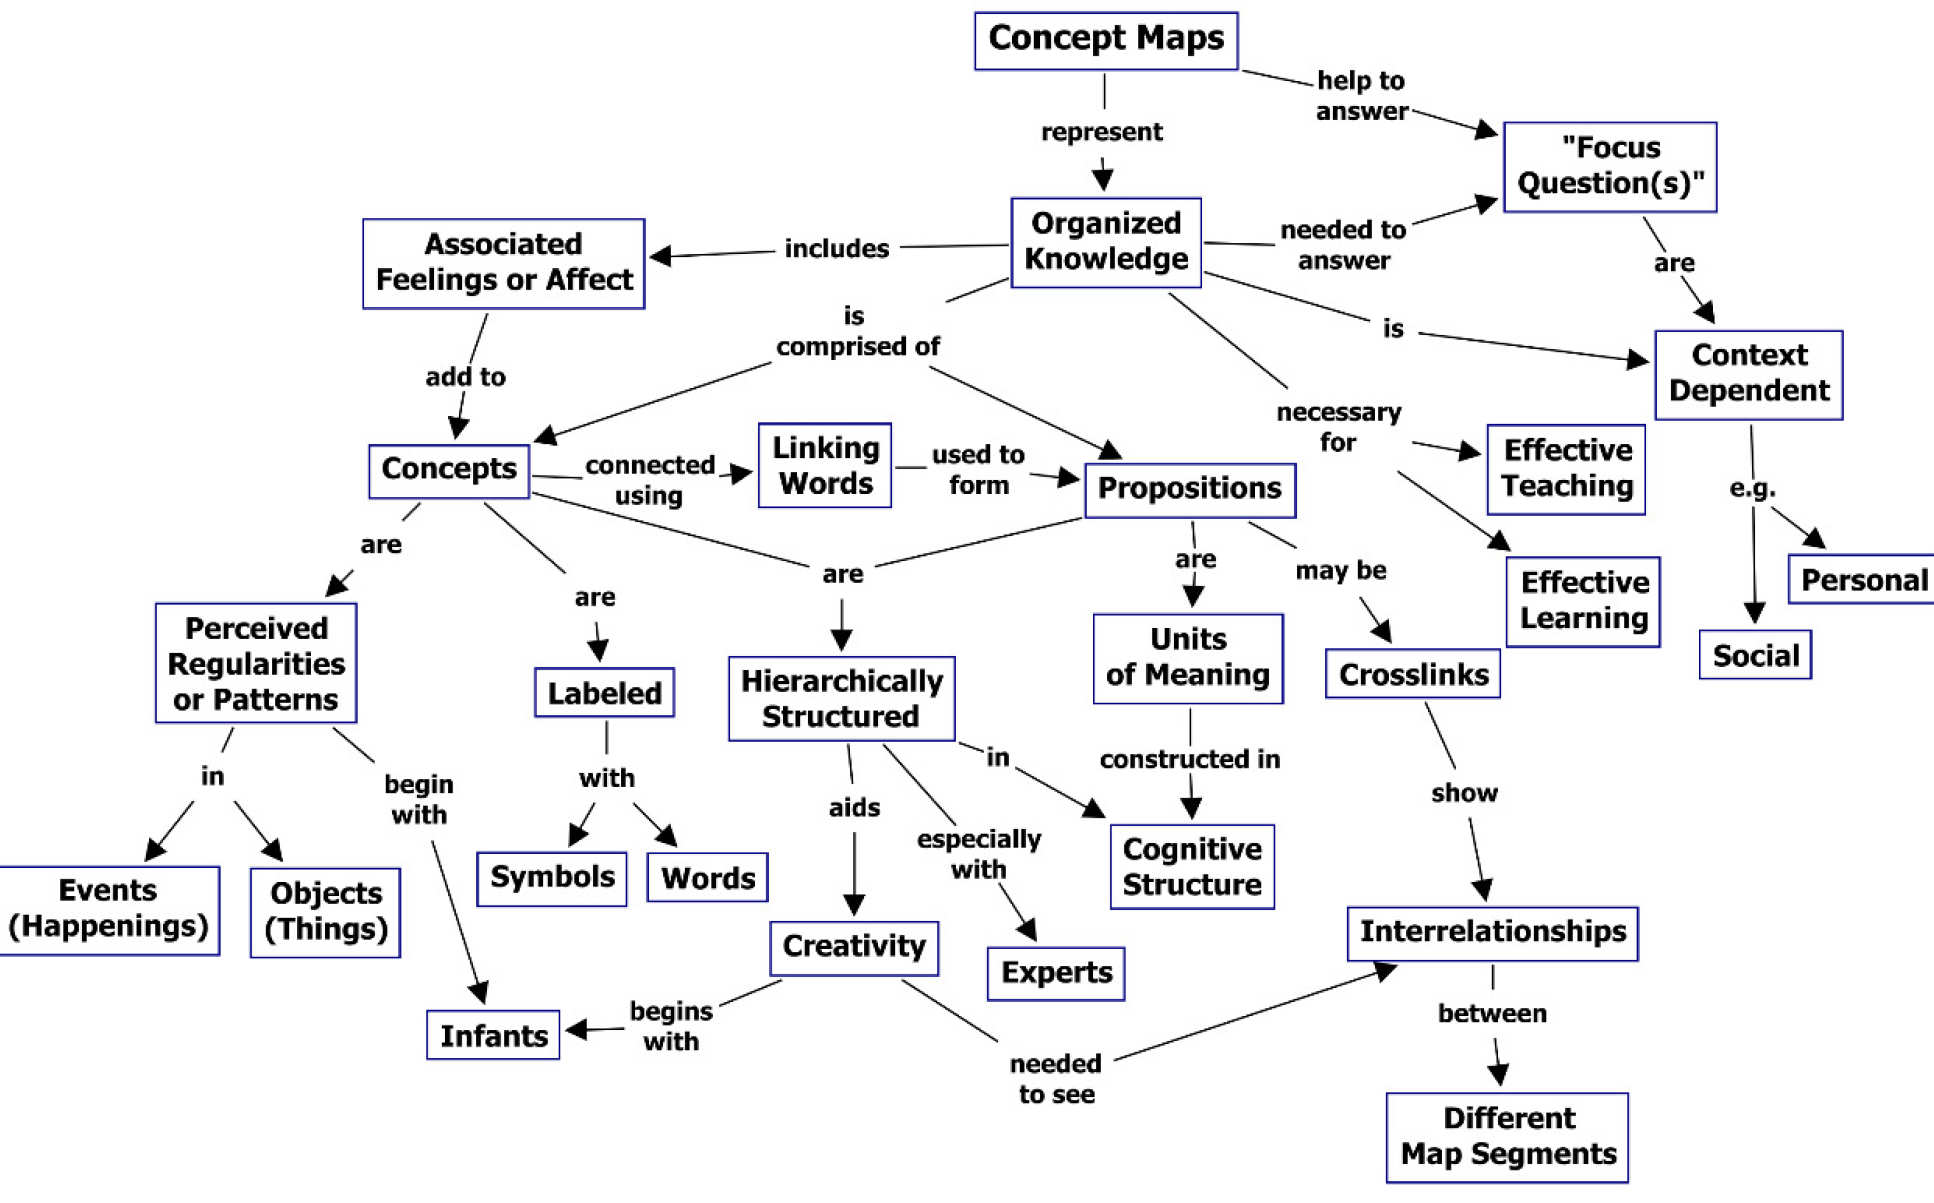 Example concept map